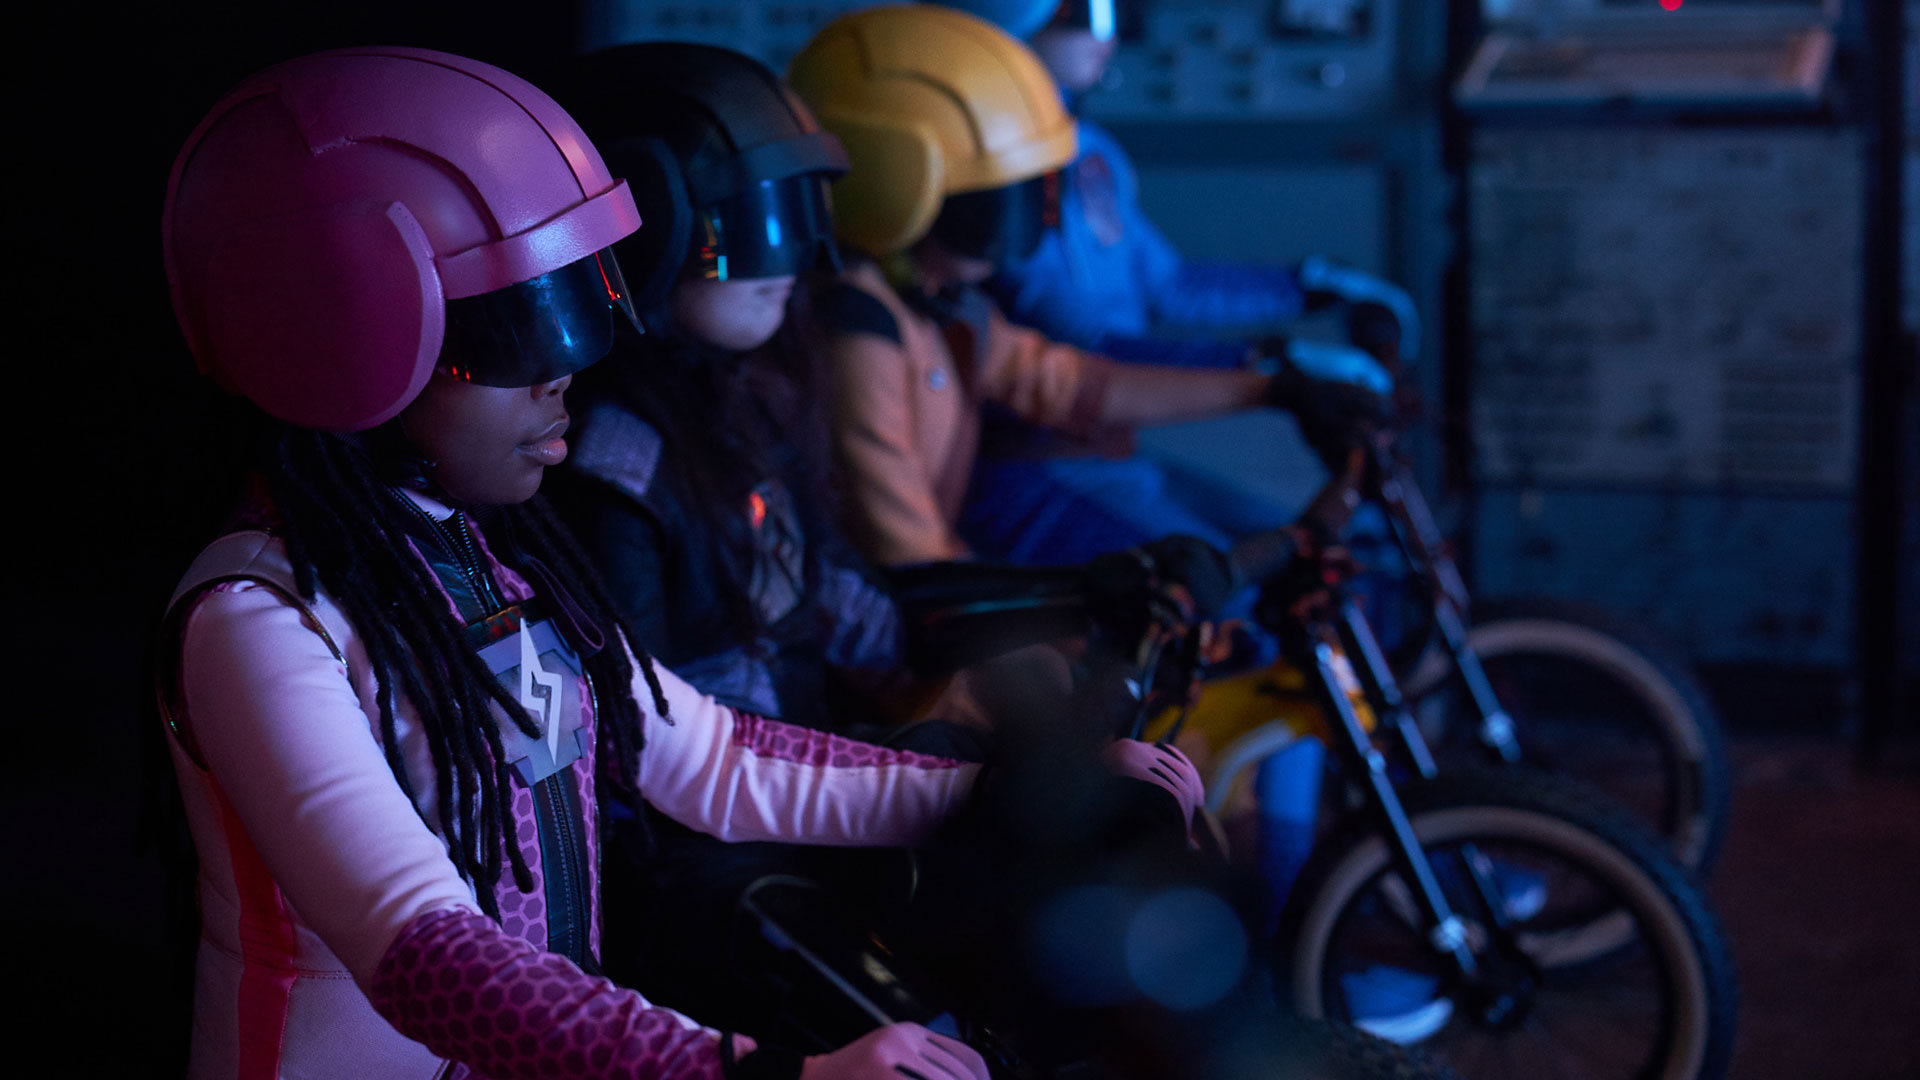 Three kids wearing matching helmets and suits in pink, black and yellow lined up on the Youth Series bike getting ready to ride